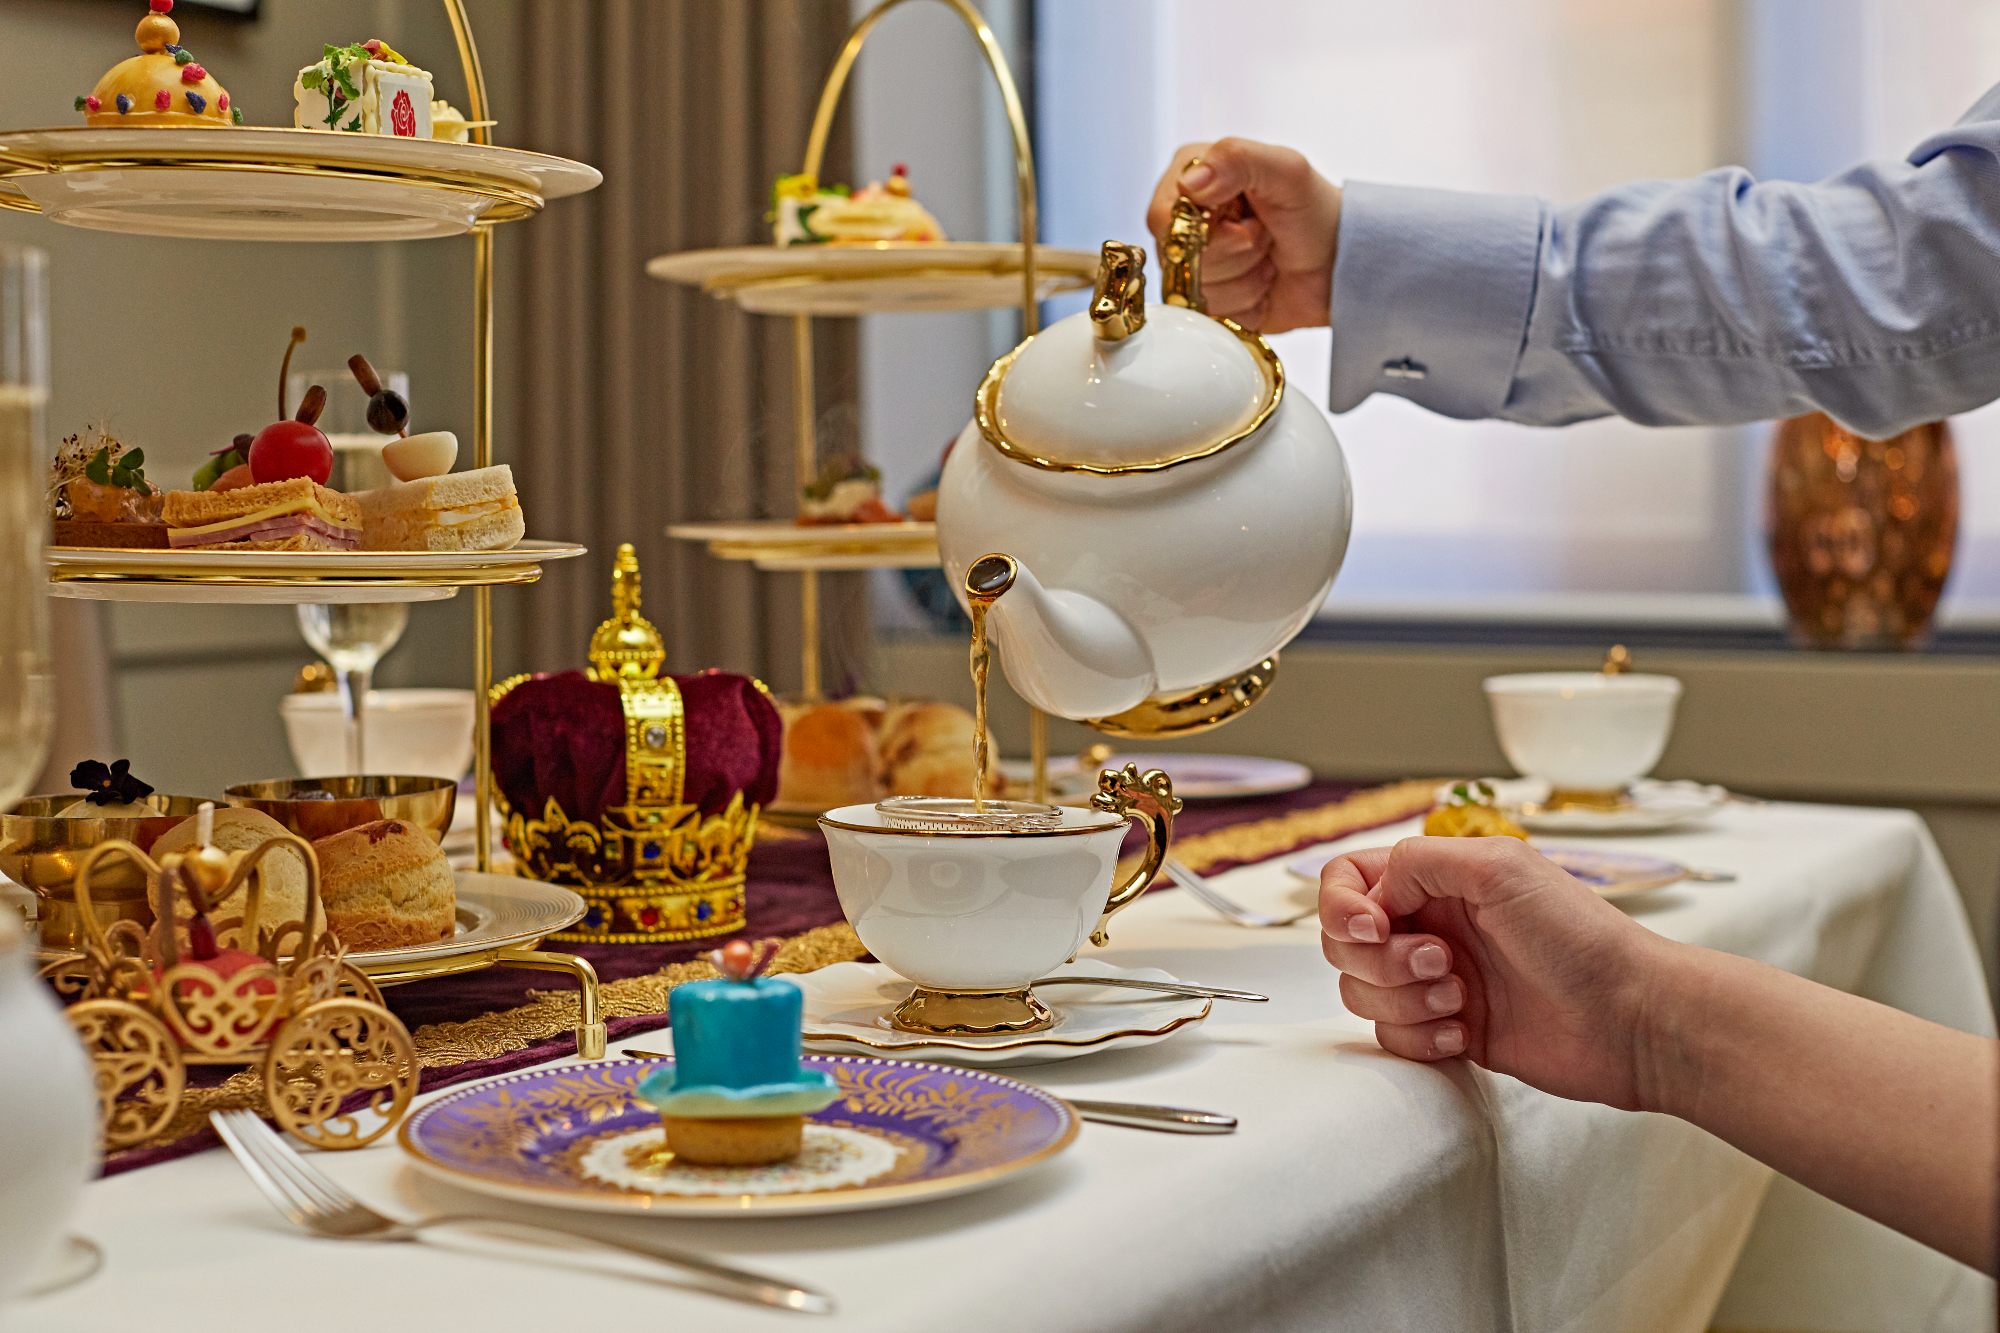 Her Majesty's favourite Earl Grey tea is recommended to accompany The Queen's Platinum Jubilee Afternoon Tea 